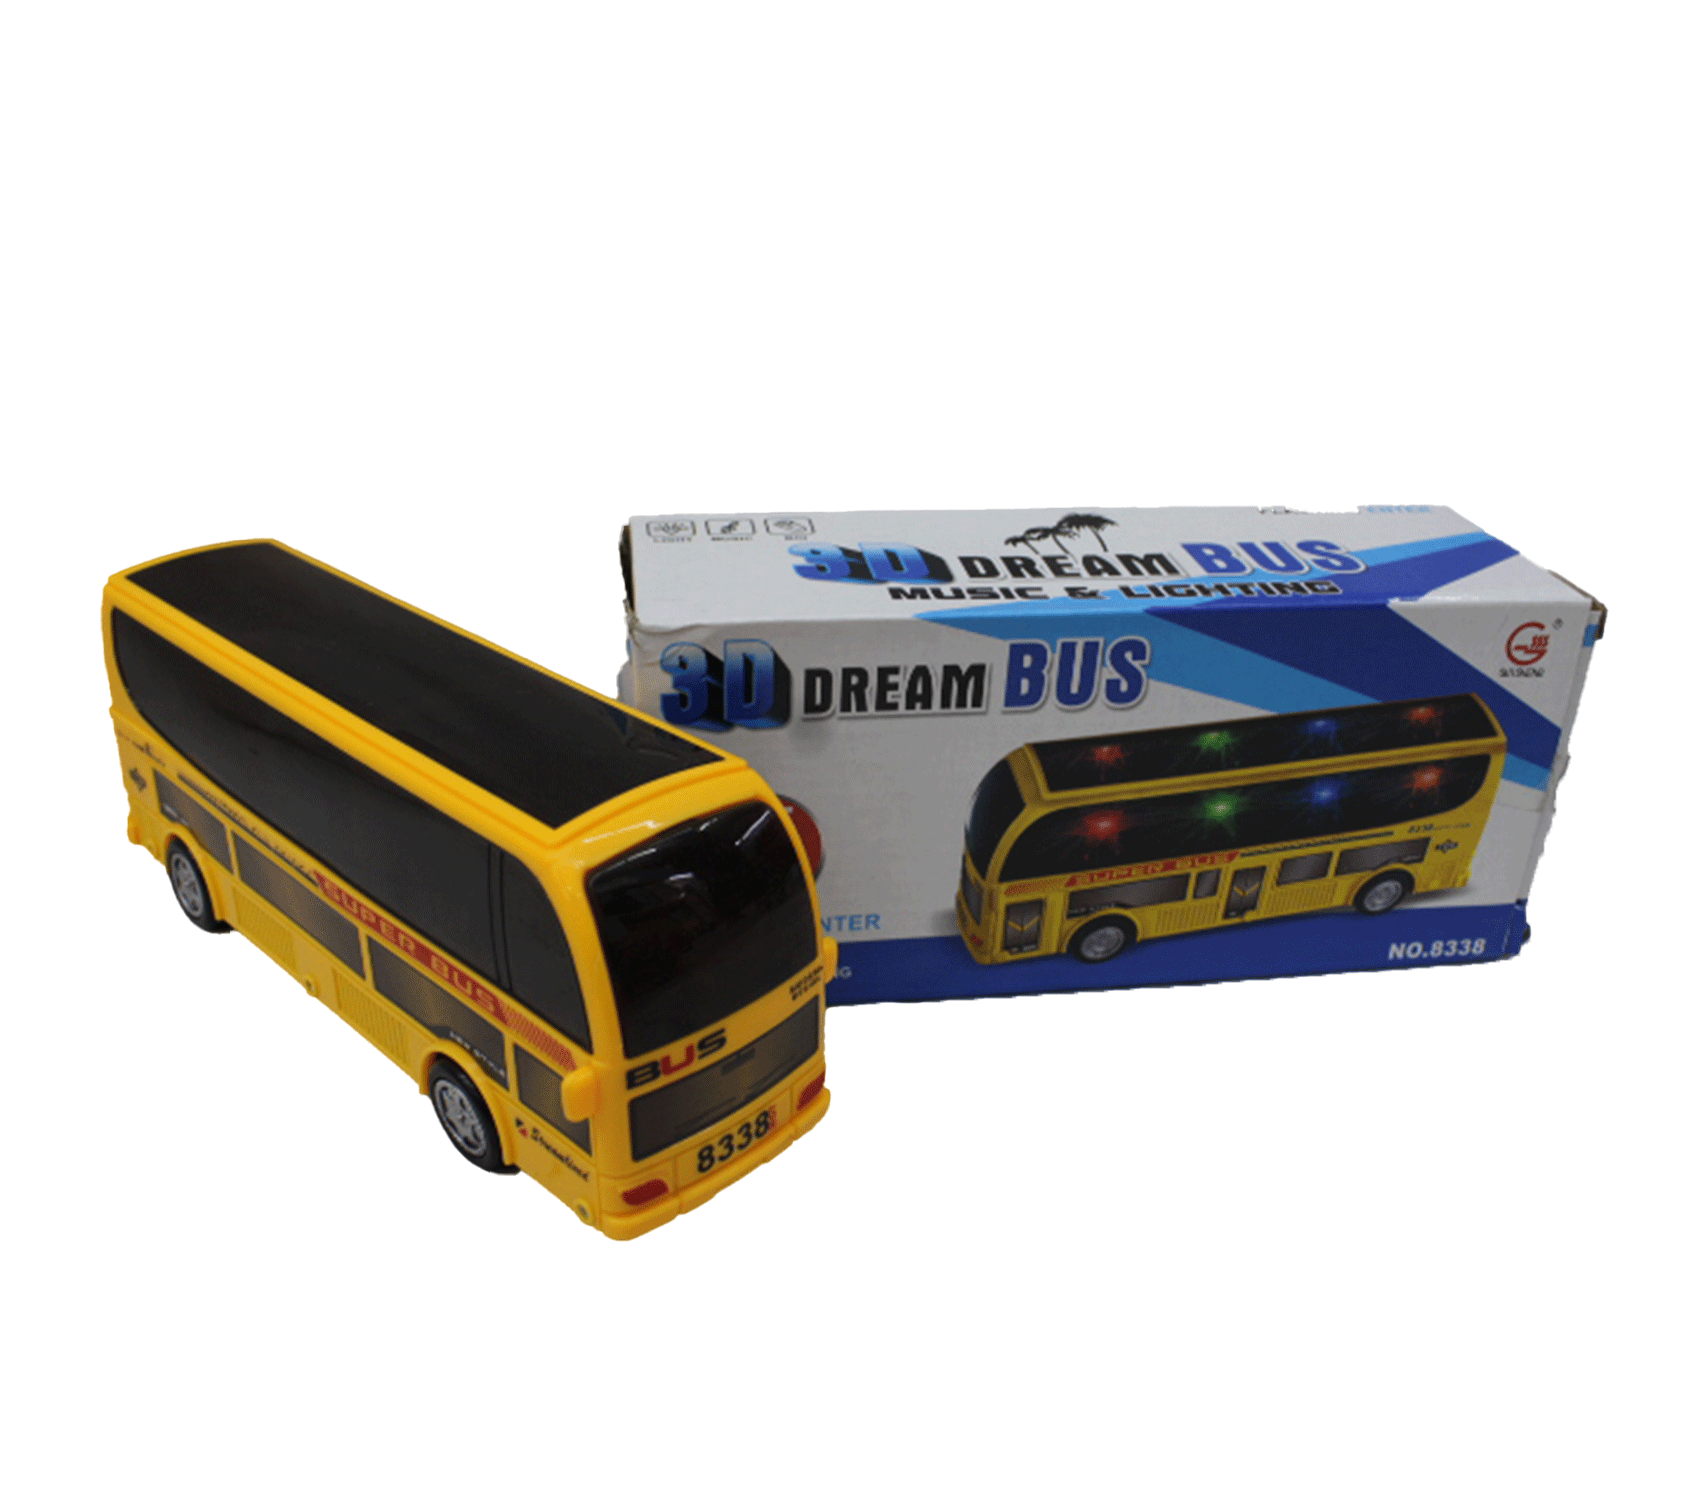 Battery Operated Toy Cars